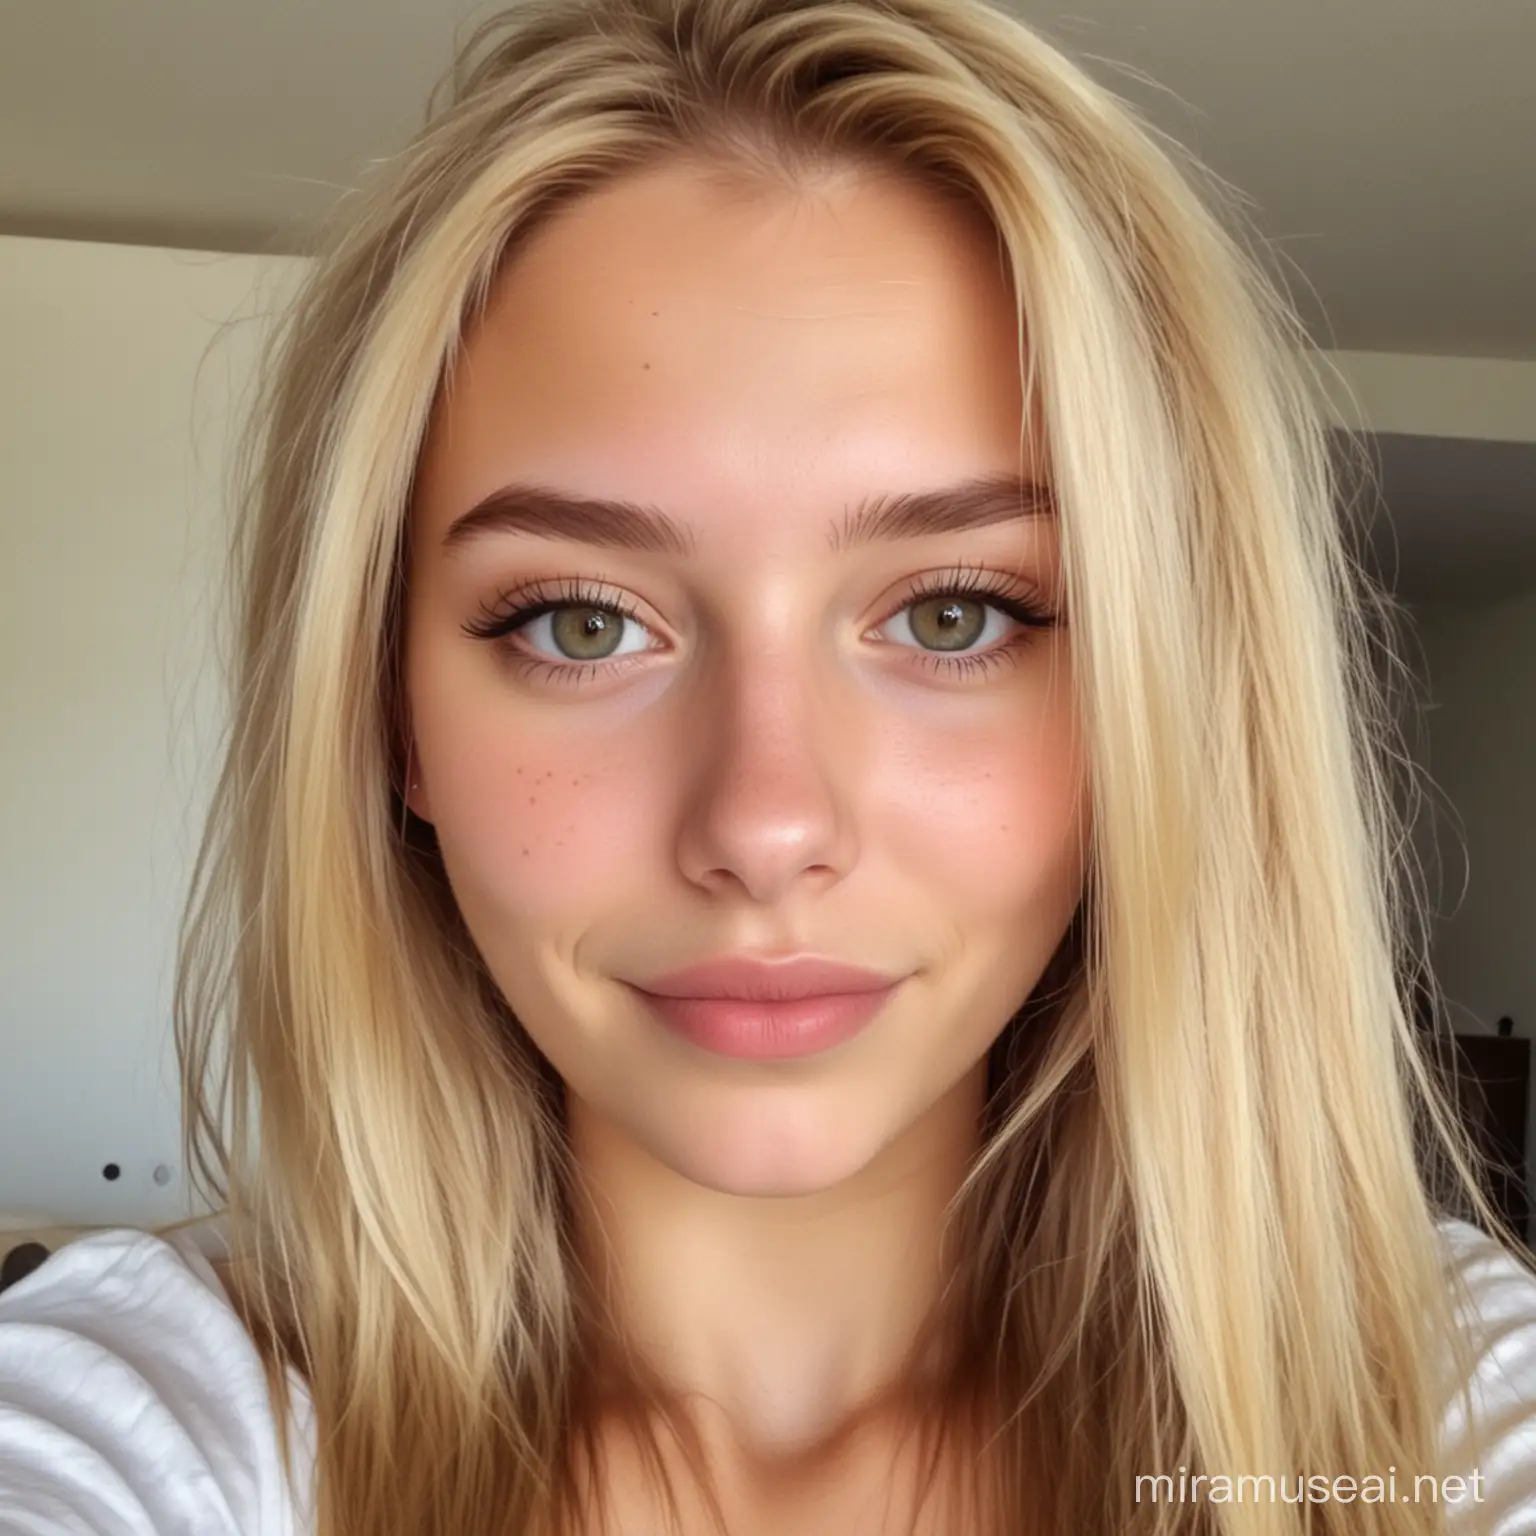 Selfie of a blonde 20-year-old girl